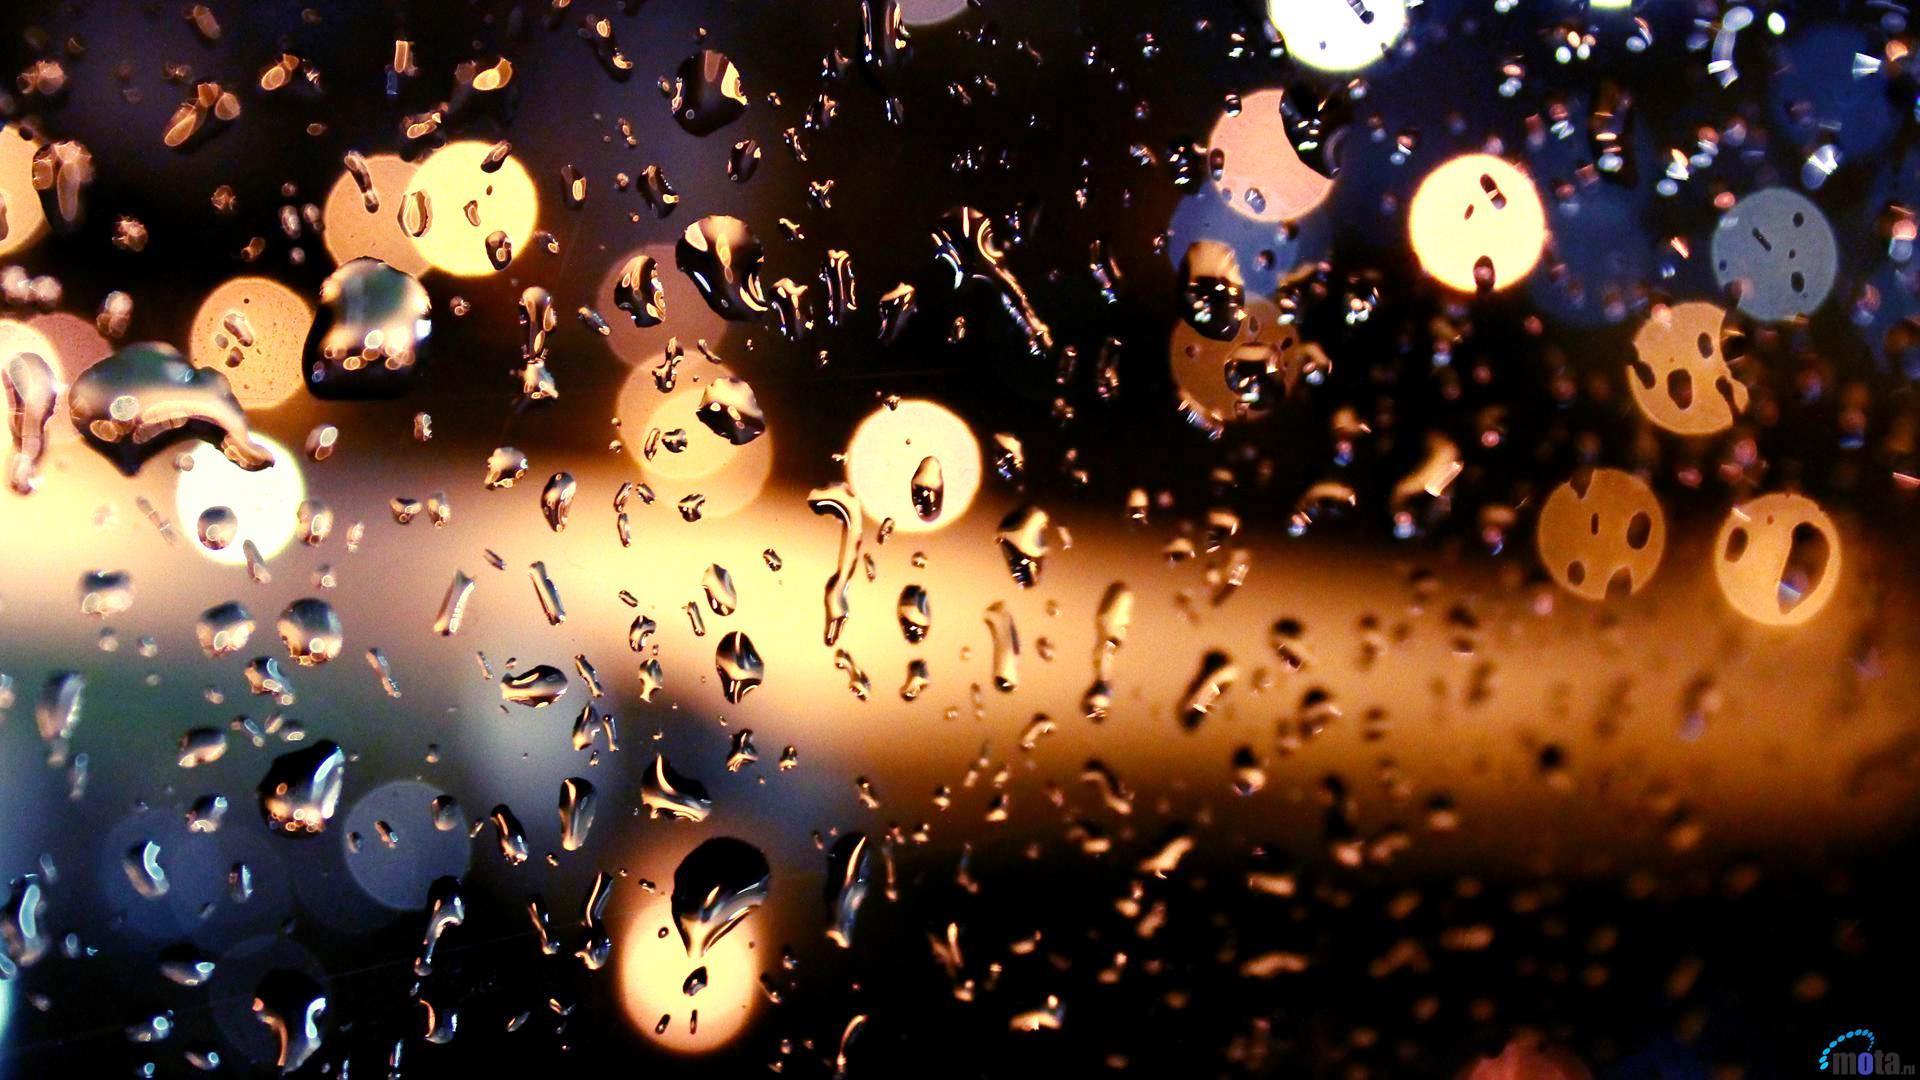 Rain On Glass Wallpapers Top Free Rain On Glass Backgrounds Wallpaperaccess